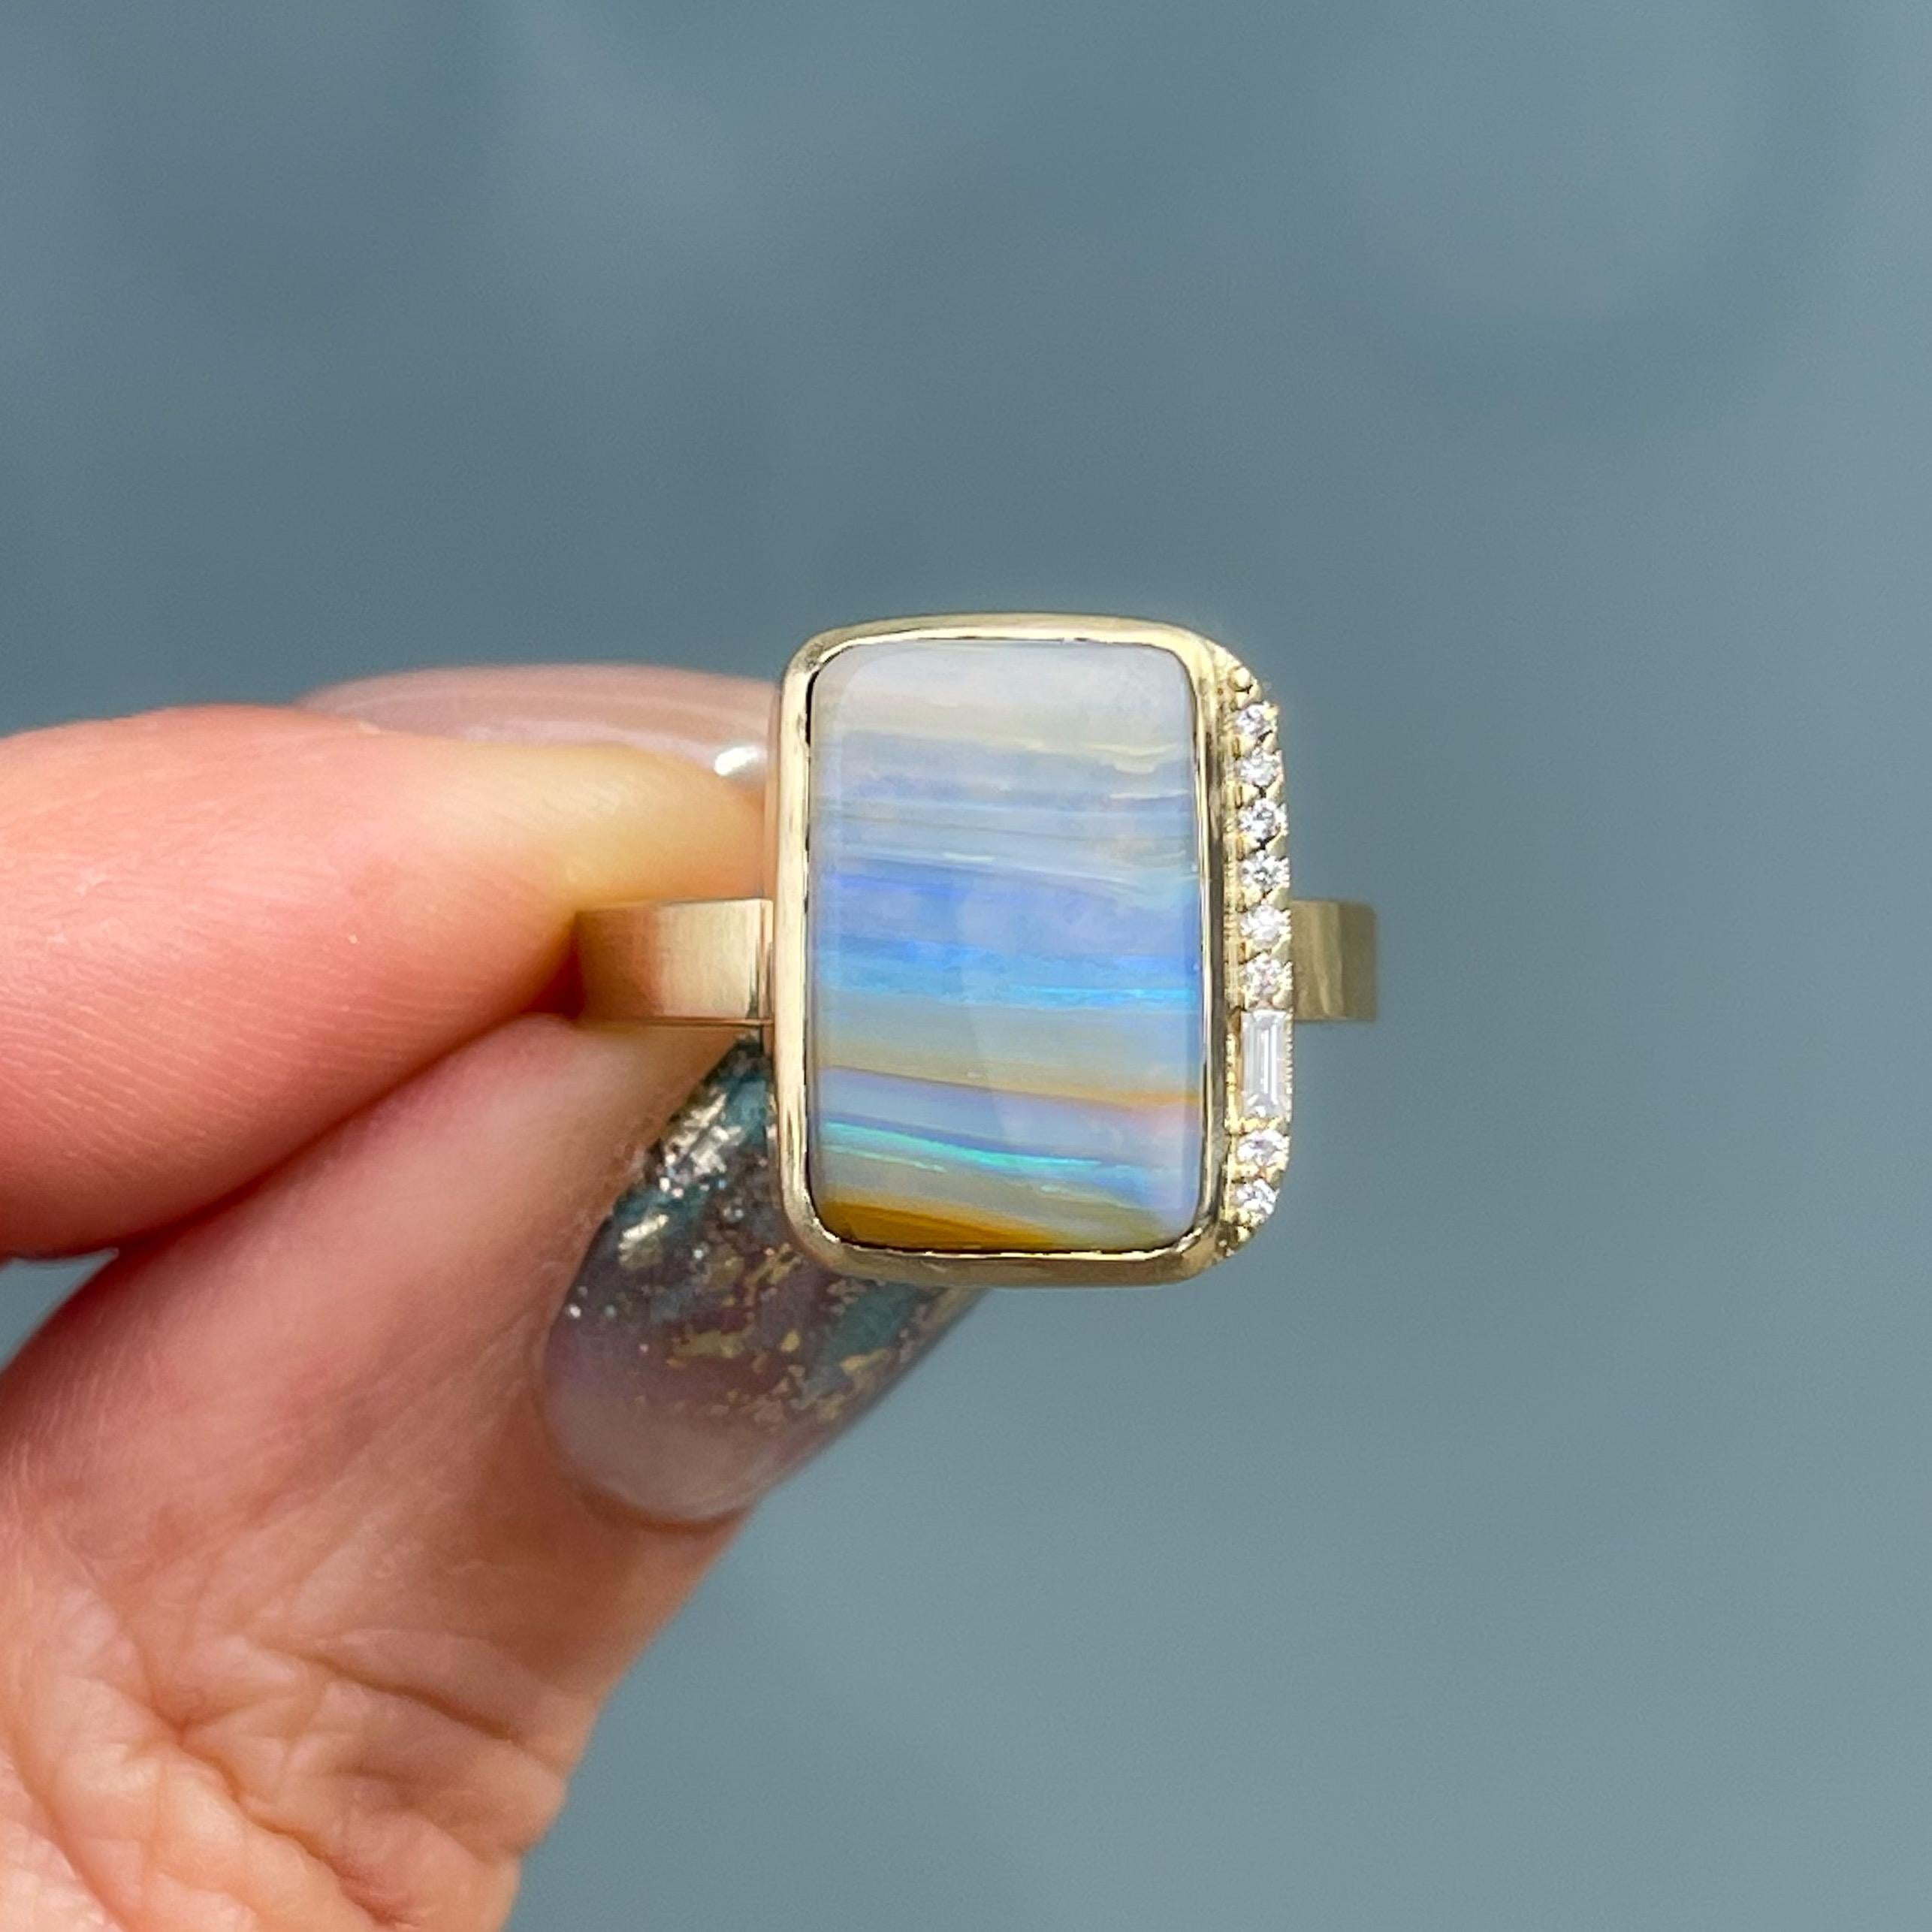 A veil of blue and diaphanous white breezes across this Australian Opal Ring. Palpable within the Boulder Opal is a warm spring day — wispy clouds laced against a cerulean backdrop of dreams. Below, terra firma sets forth a caramel colored pathway —